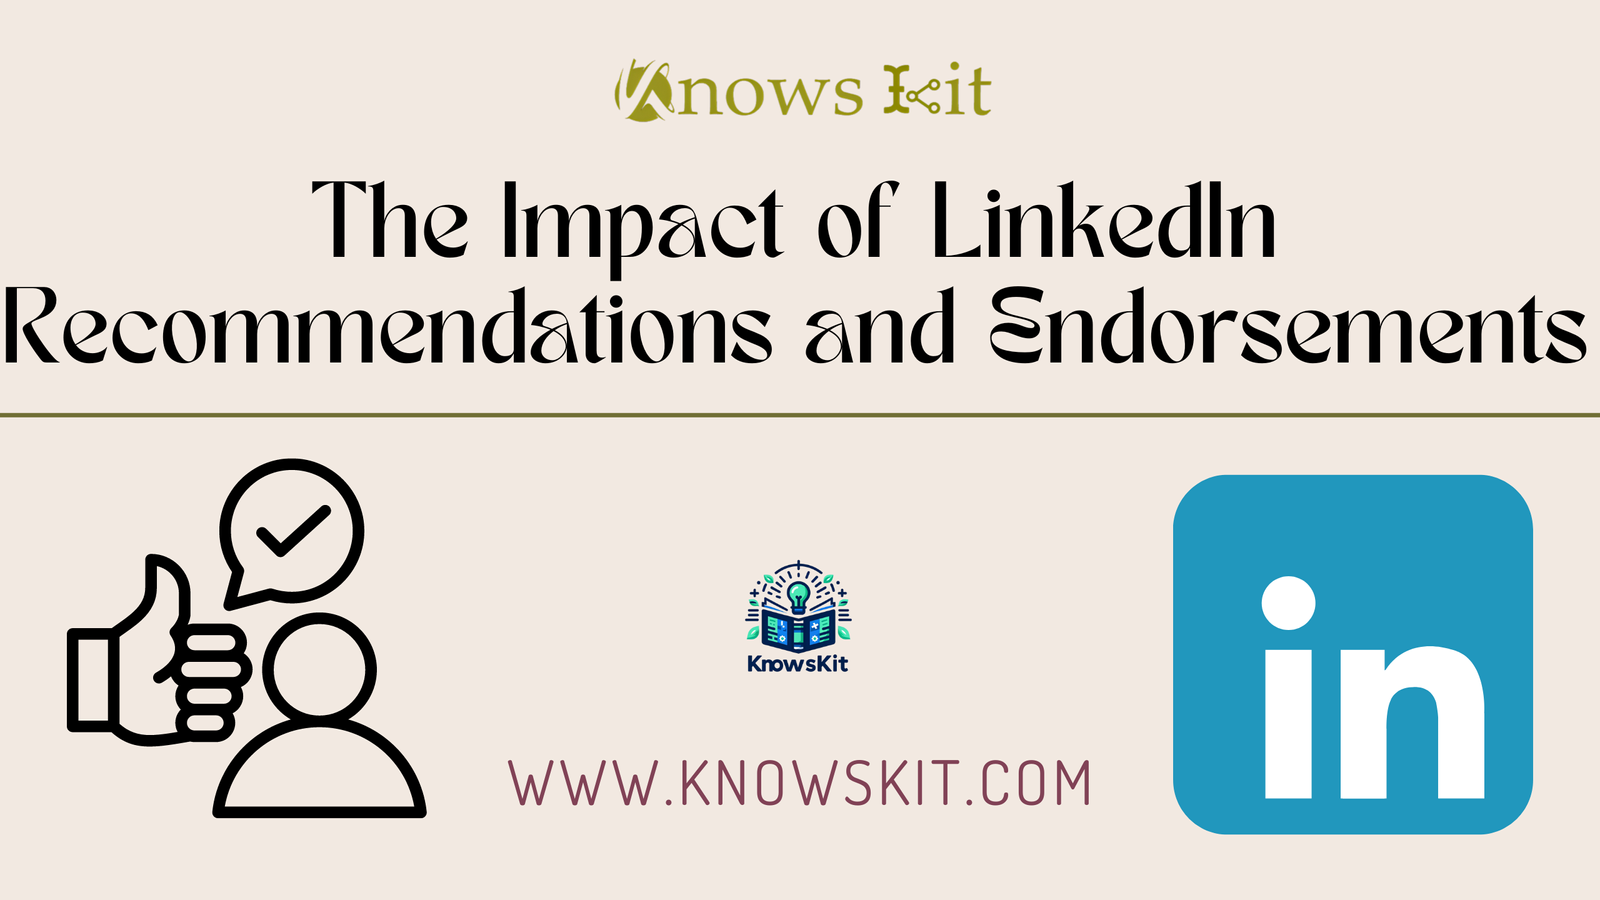 The Impact of LinkedIn Recommendations and Endorsements